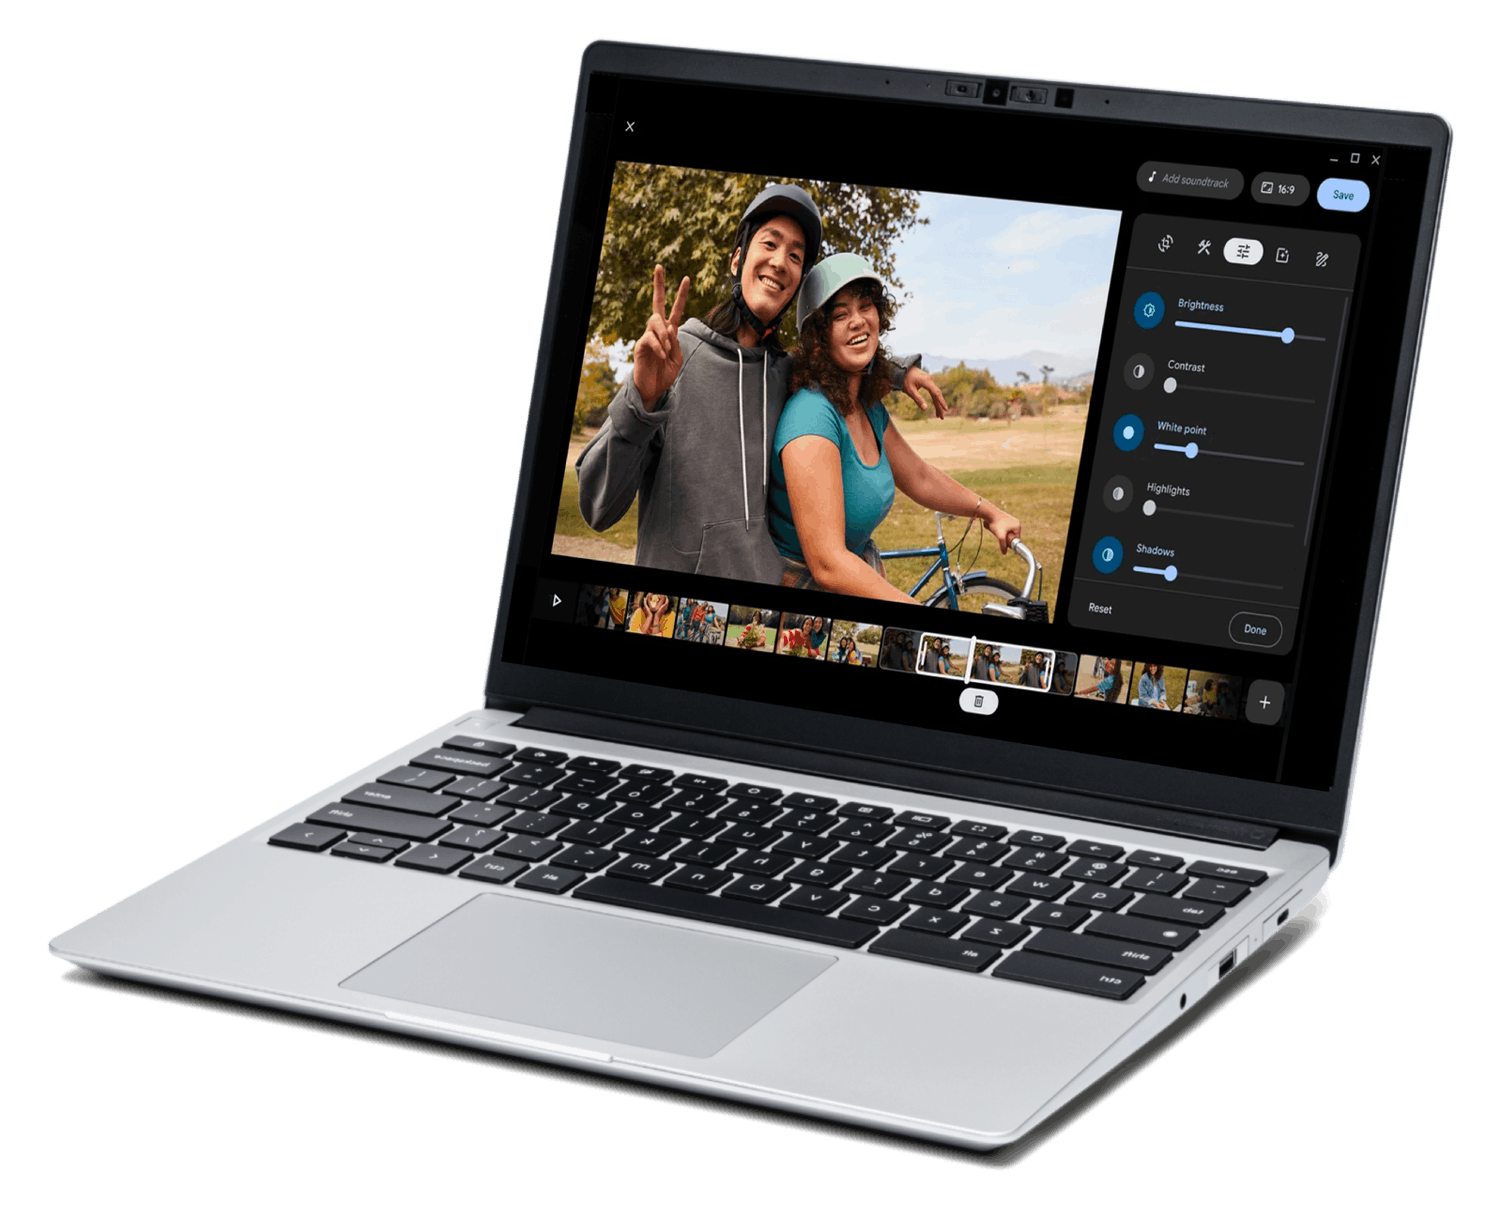 The Framework Laptop Chromebook Edition with the Google Photos app on the screen